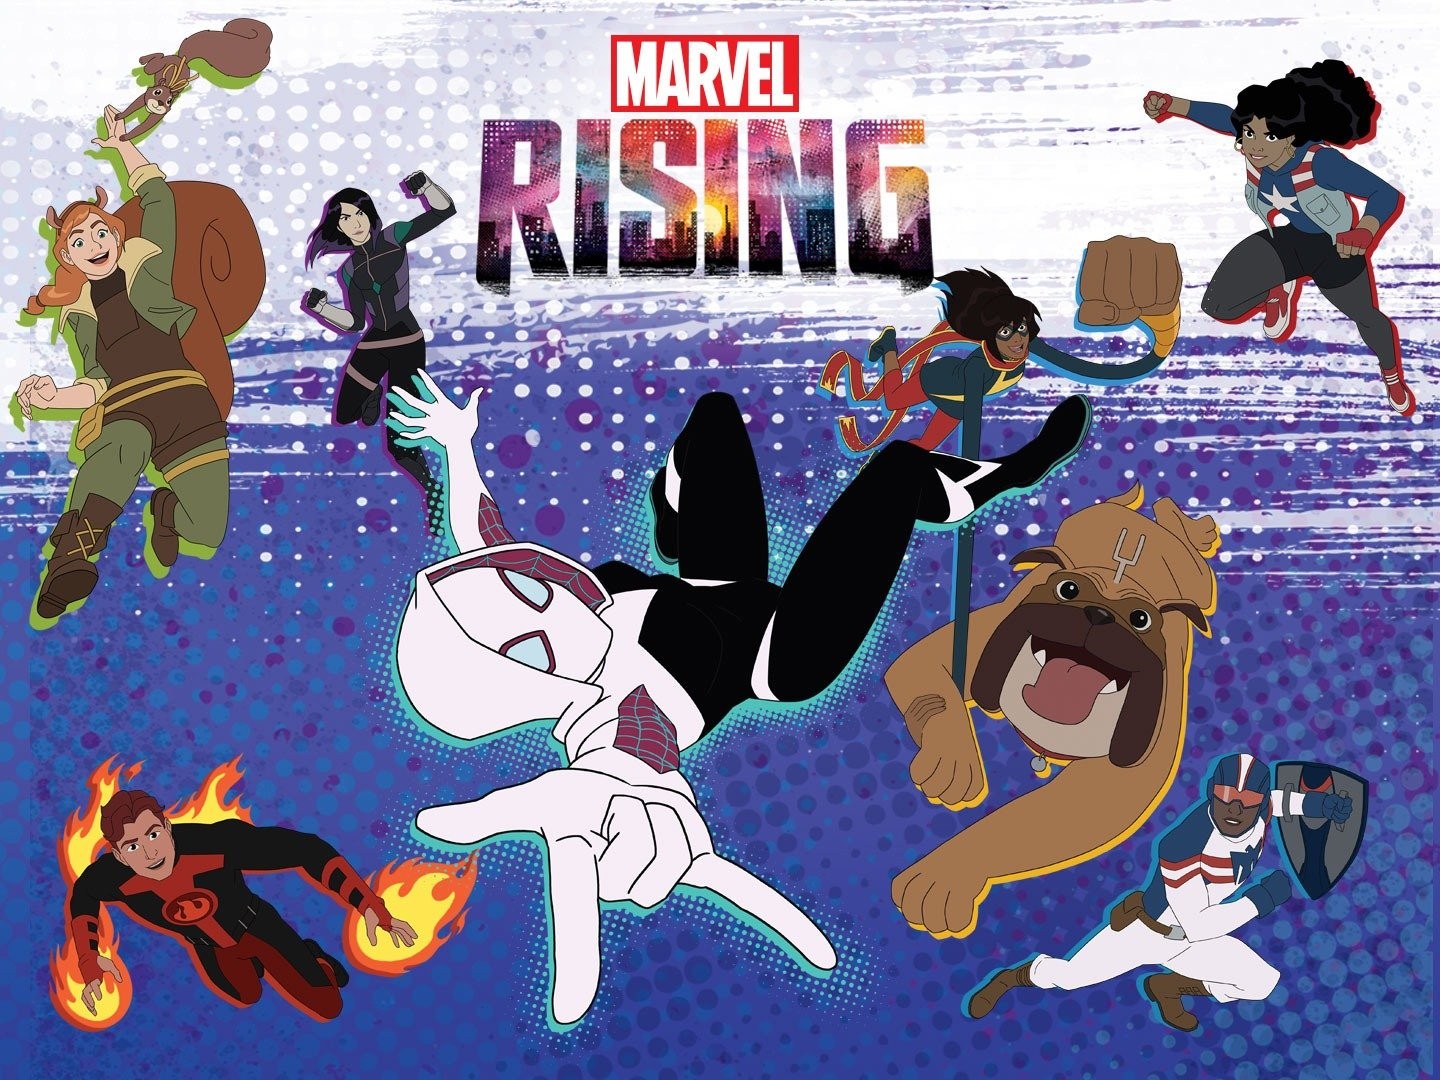 Marvel Rising - Just 15 minutes until the premiere of Marvel Rising:  Chasing Ghosts on the Marvel HQ  channel! Are you tuning in? Go